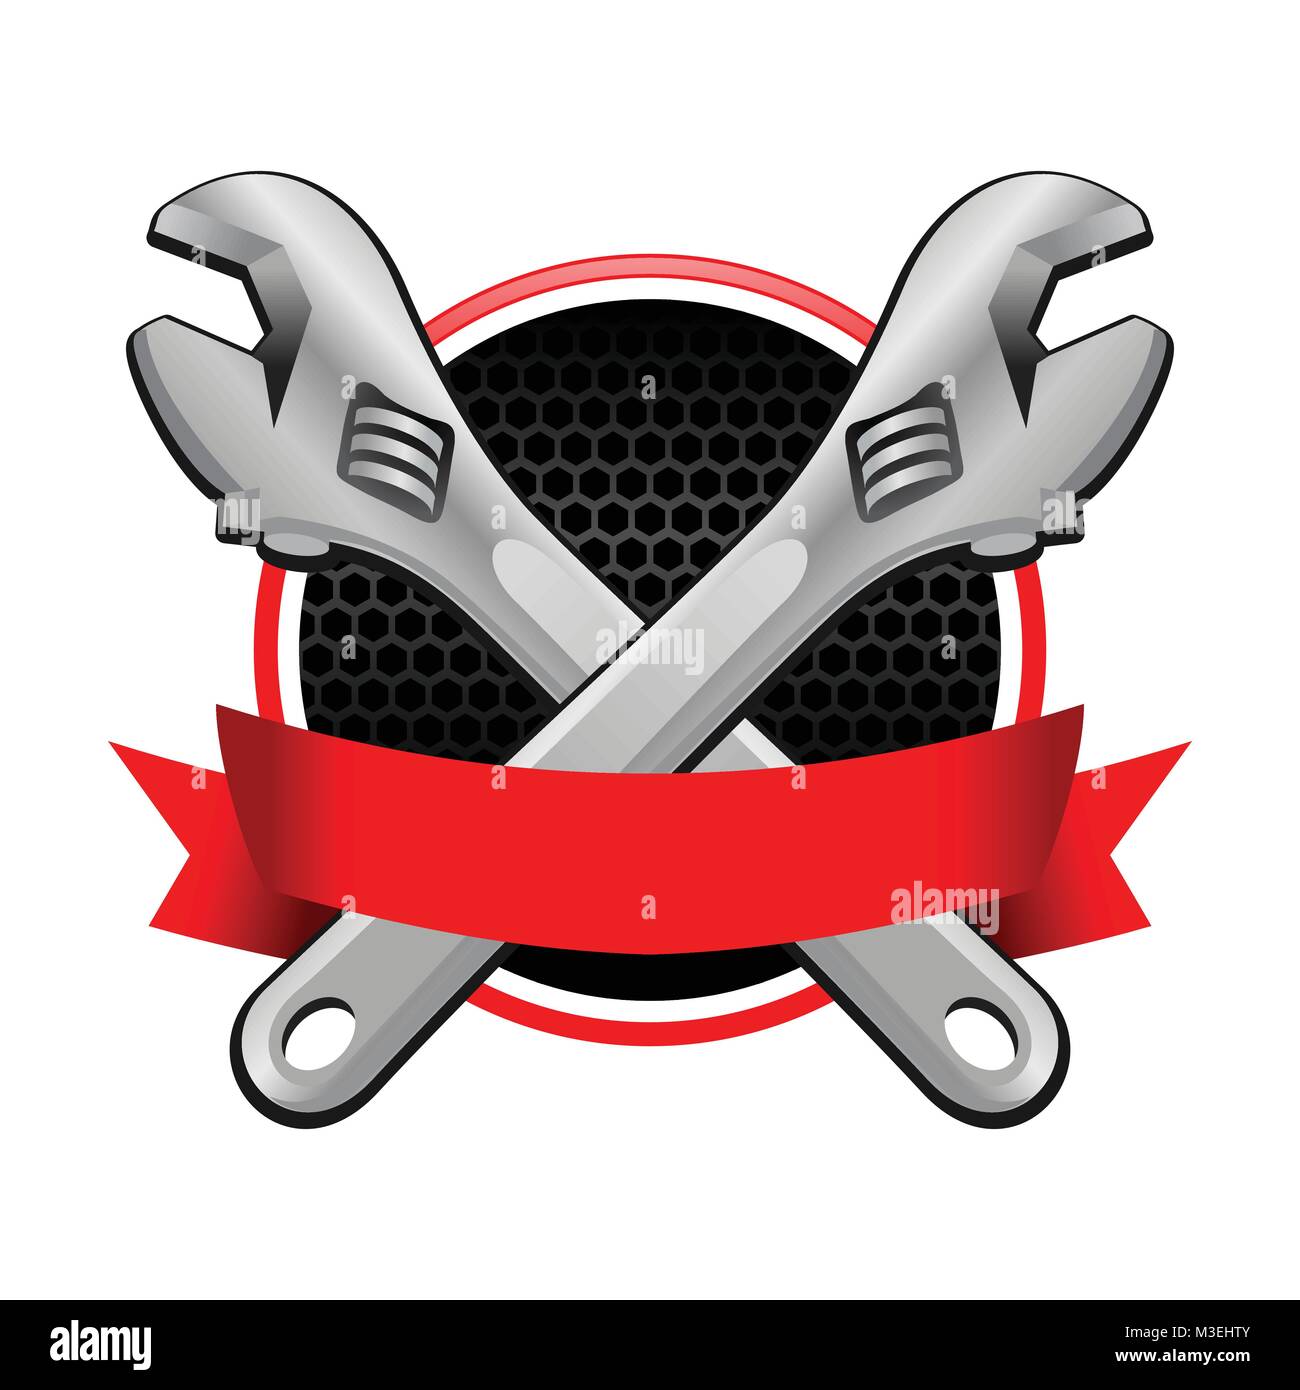 Wrench Tools with Ribbon: A Construction Spanner Logo Design